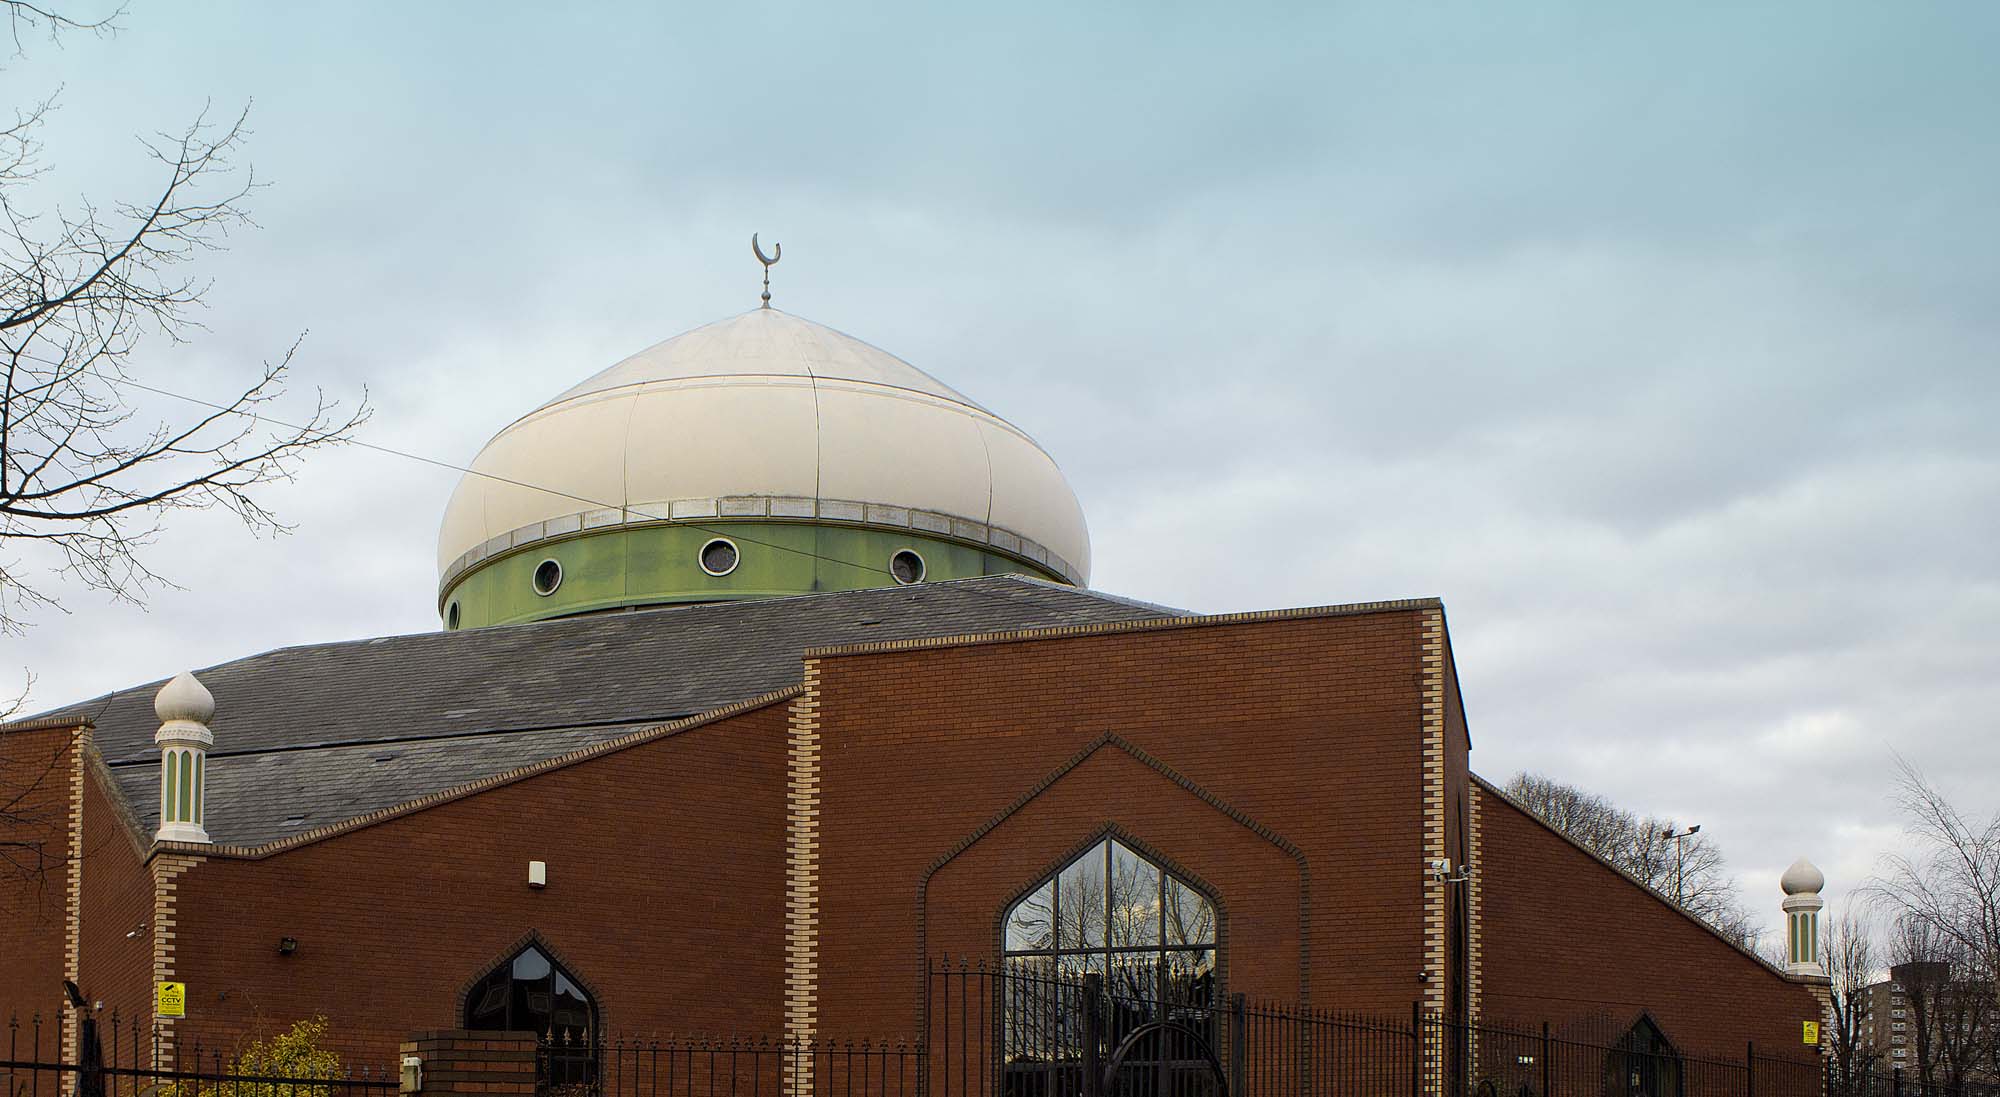 The beautiful dome of the Islamic Centre Leicester. The city is home to a wide variety of places of worship for many faiths -